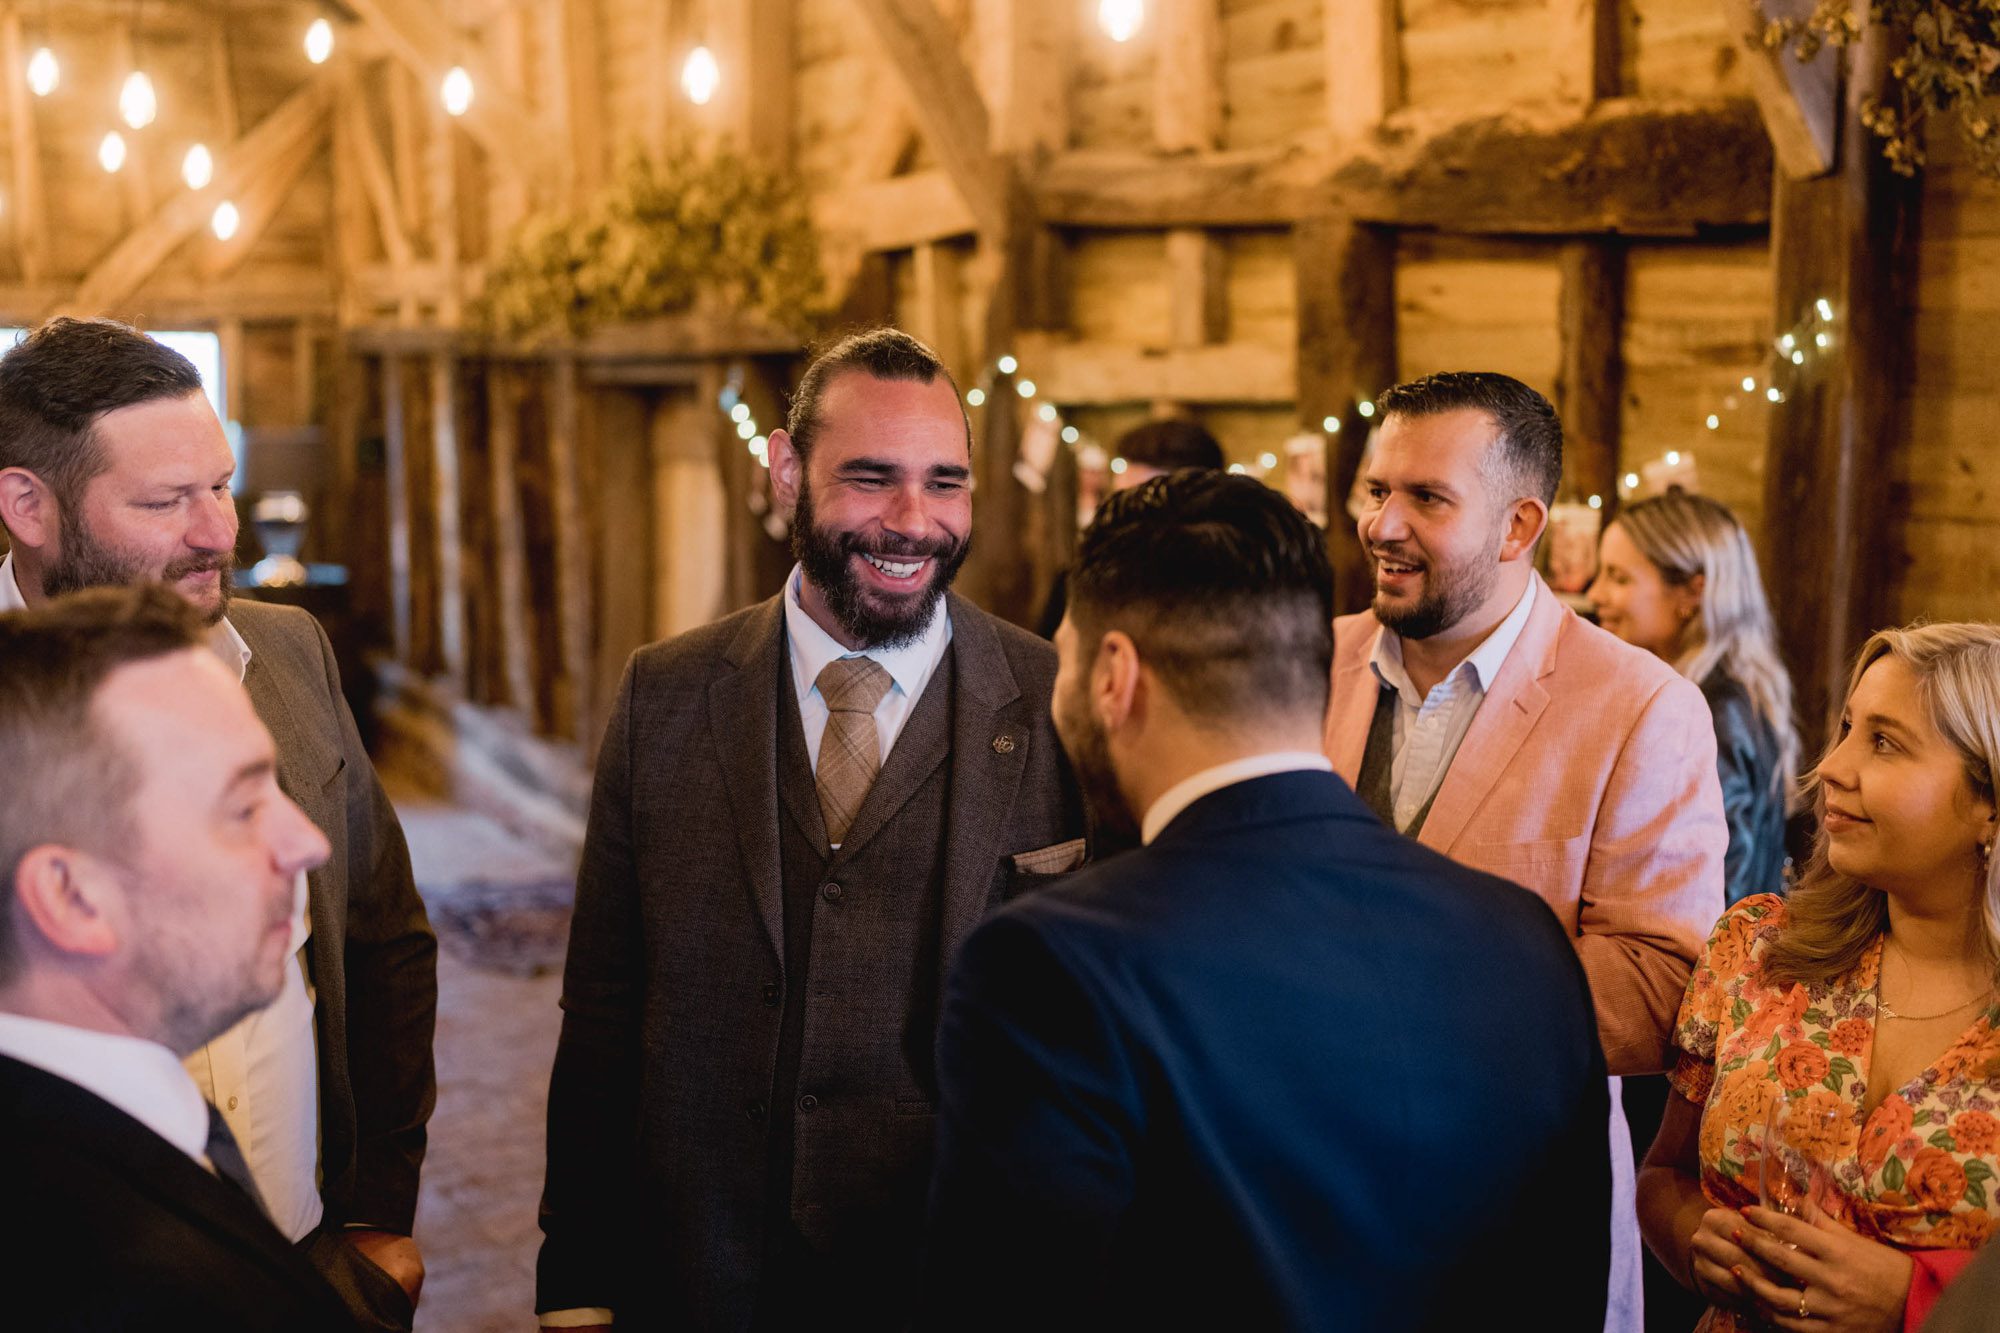 A guest smiling at a wedding.